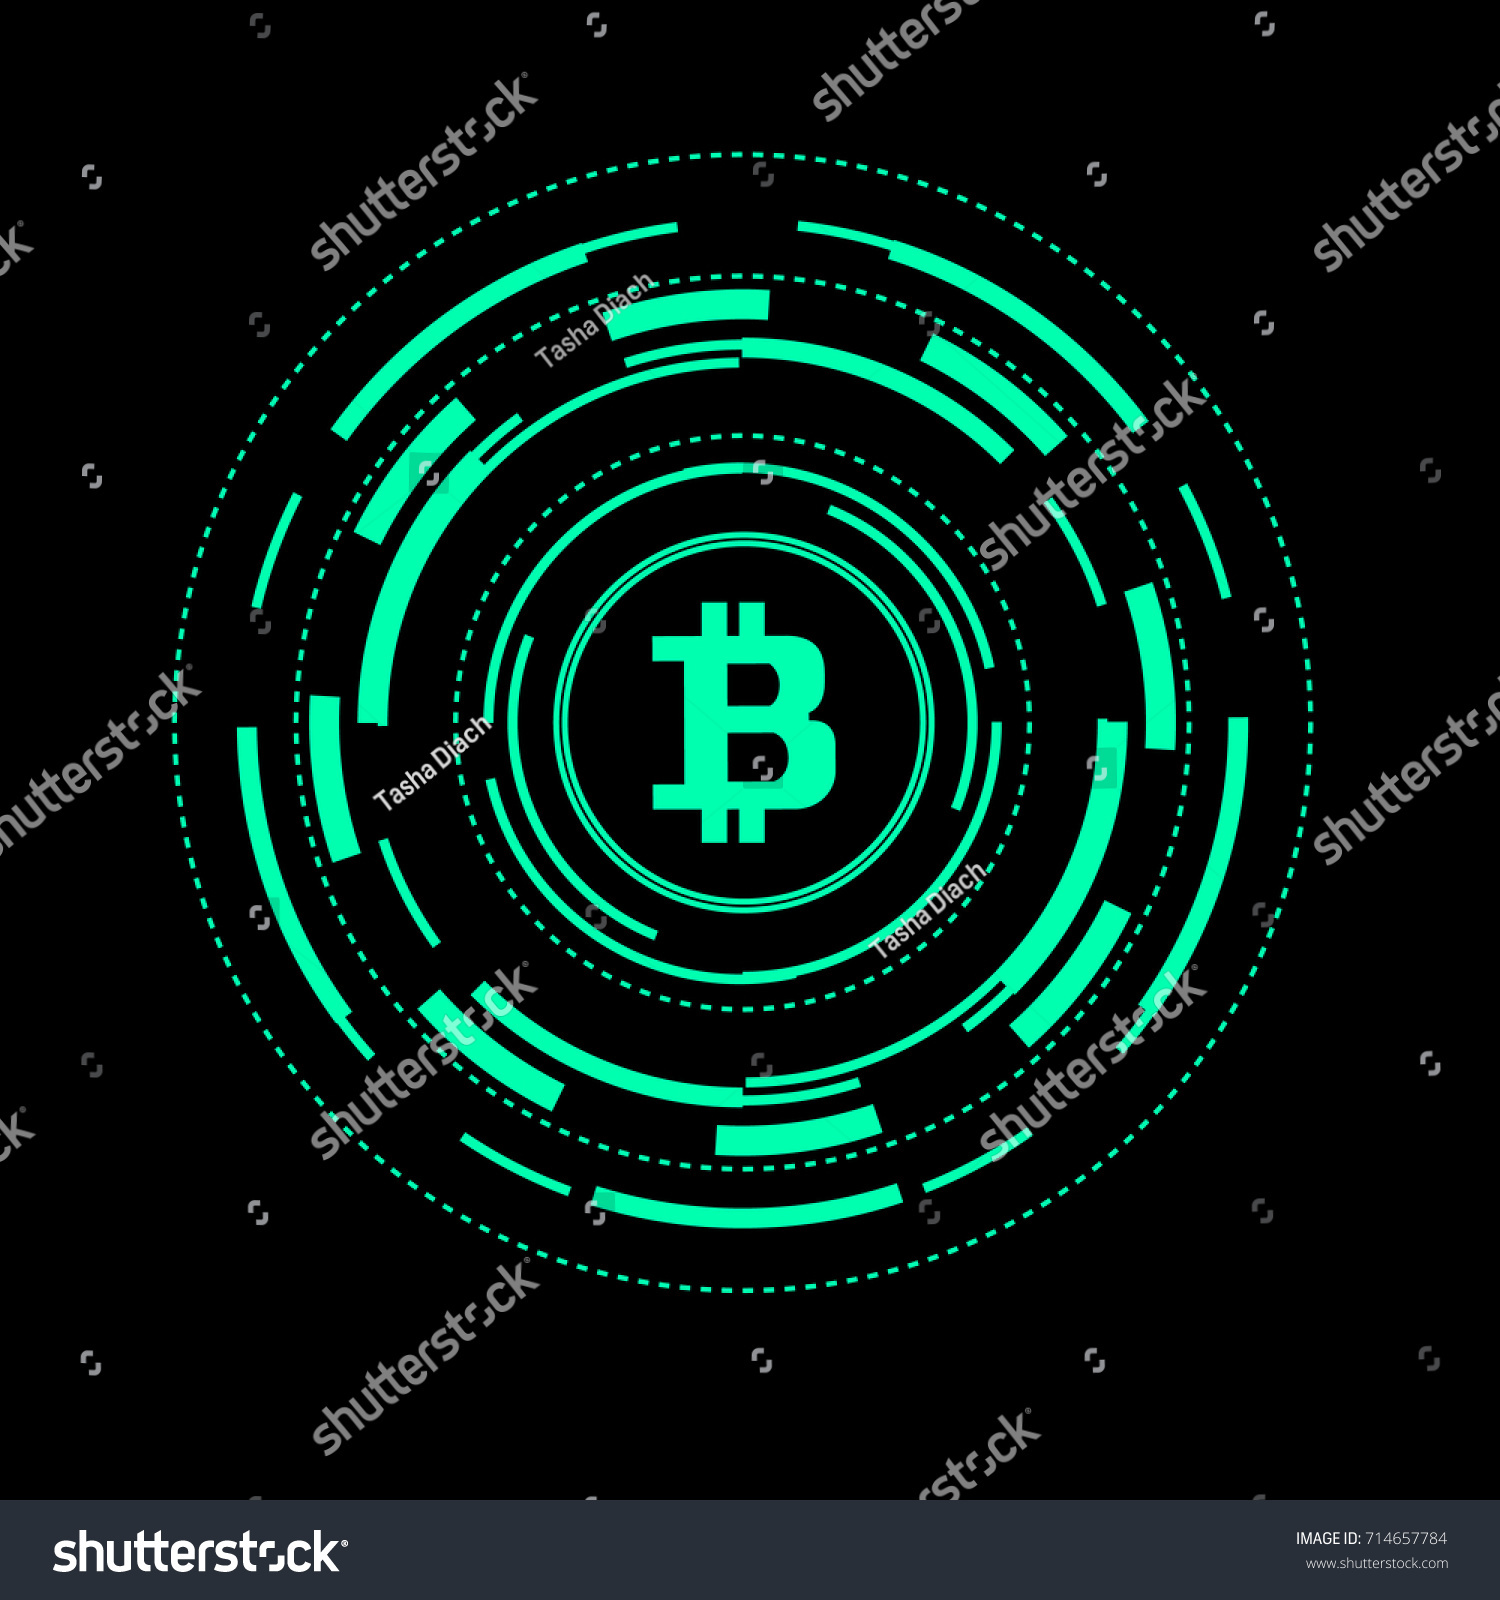 SVG of  Bitcoin.Abstract Circuit Board Bitcoin Technology Background Illustration.Abstract technology bitcoins logo on binary code. svg